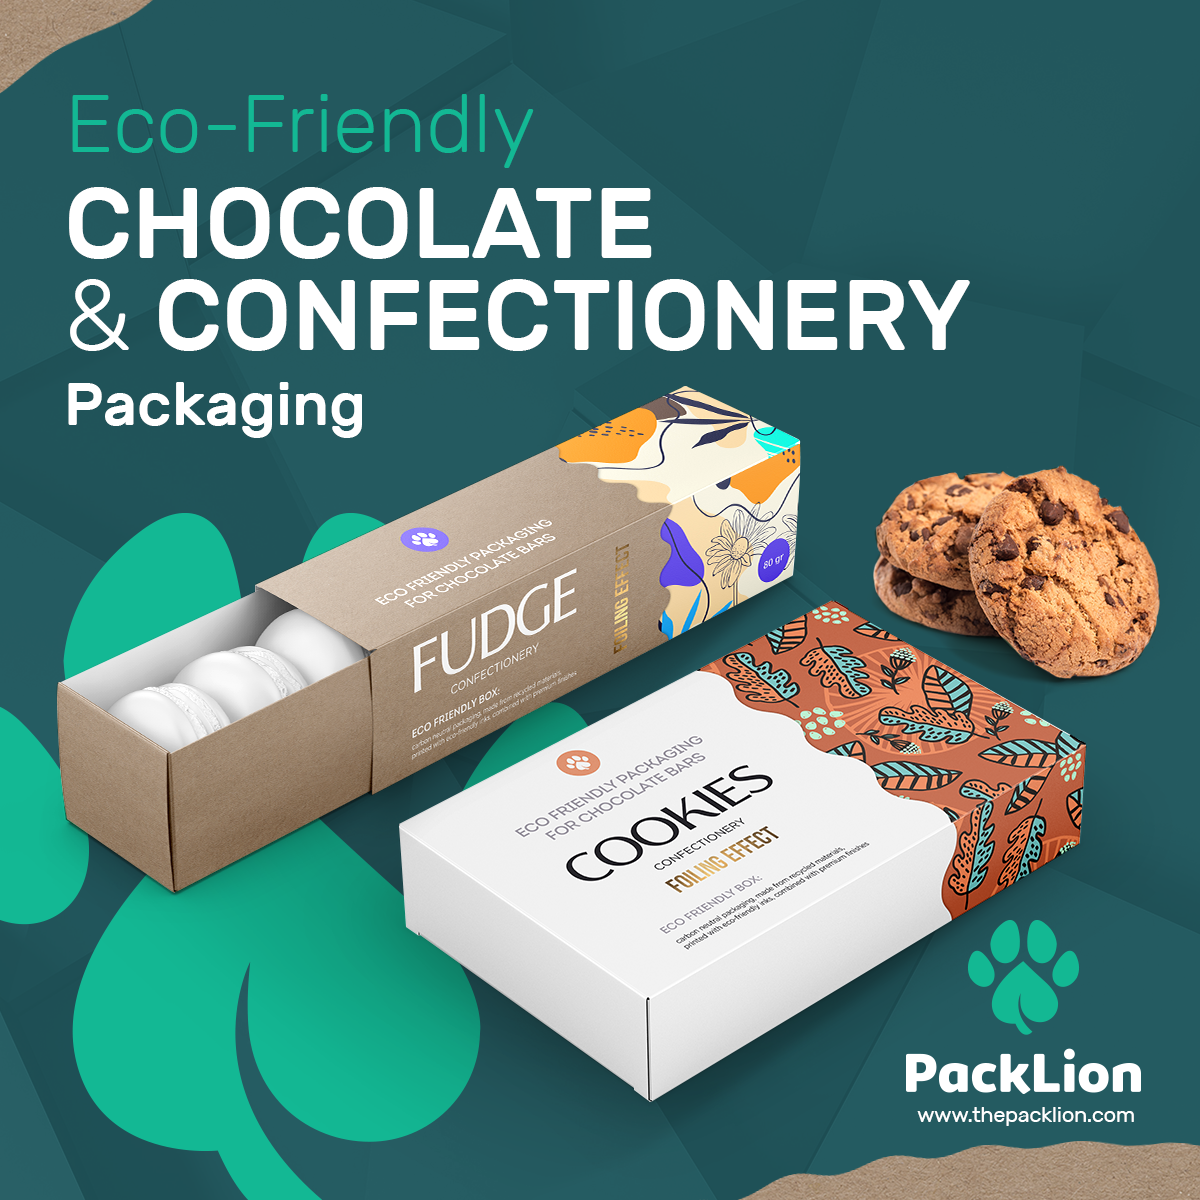 Buying Chocolate Eco-Friendly Packaging has never been easier!